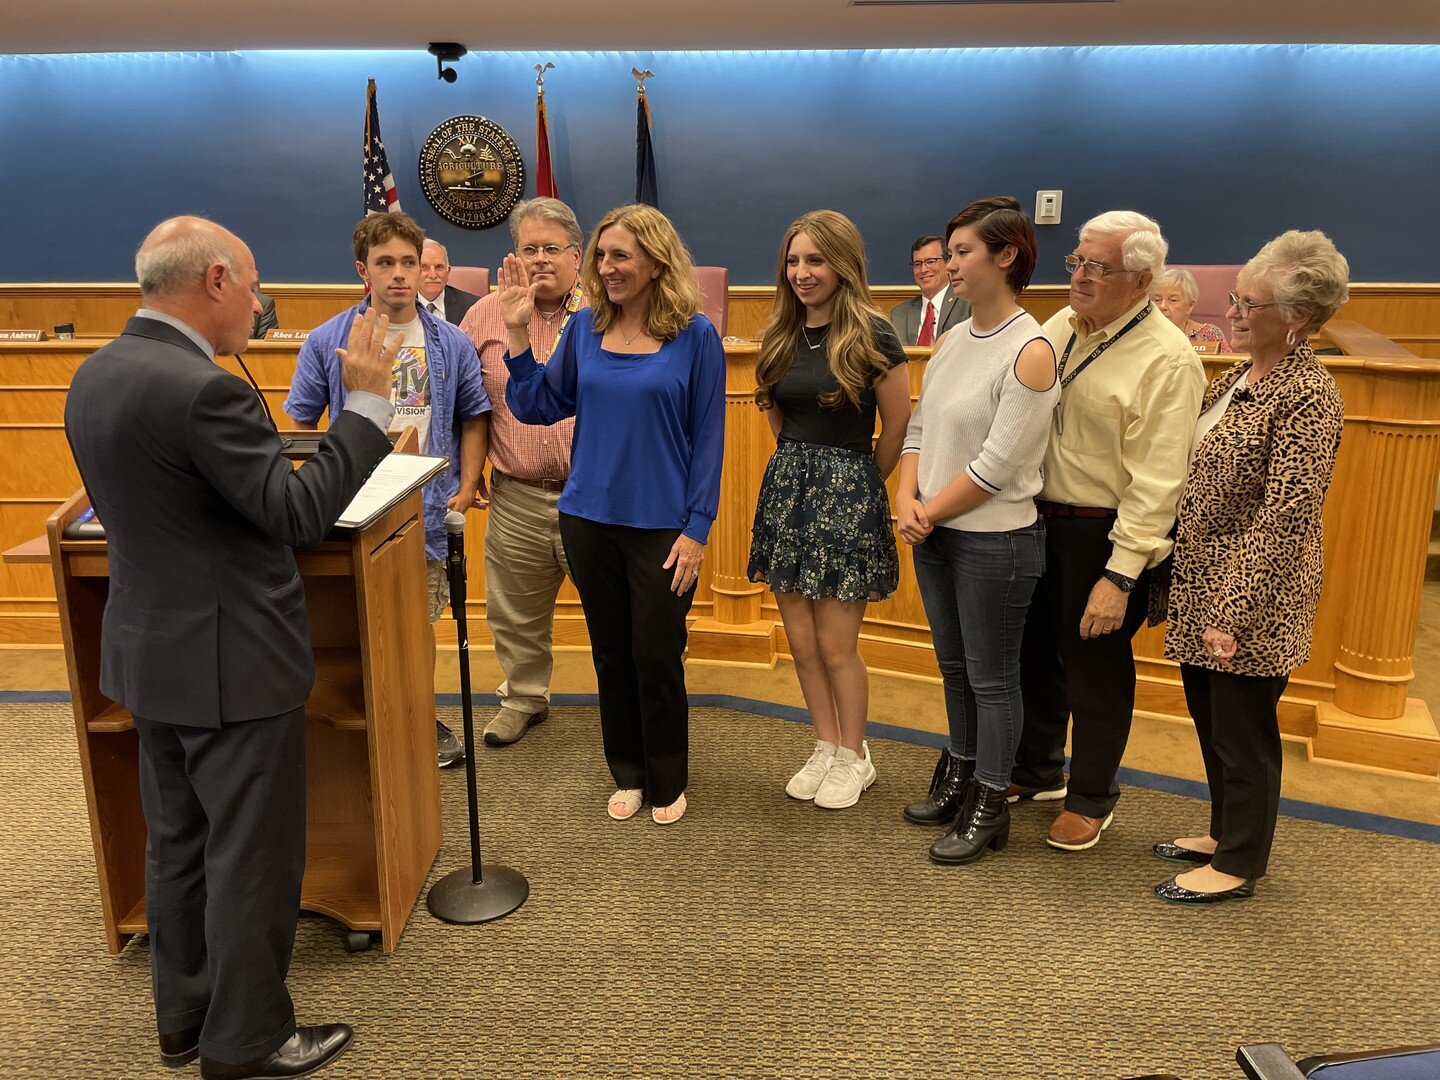 Monday, surrounded by family, I was sworn in for my 2nd term in office (4 years). I am honored that I have the privilege of serving the residents of Brentwood.